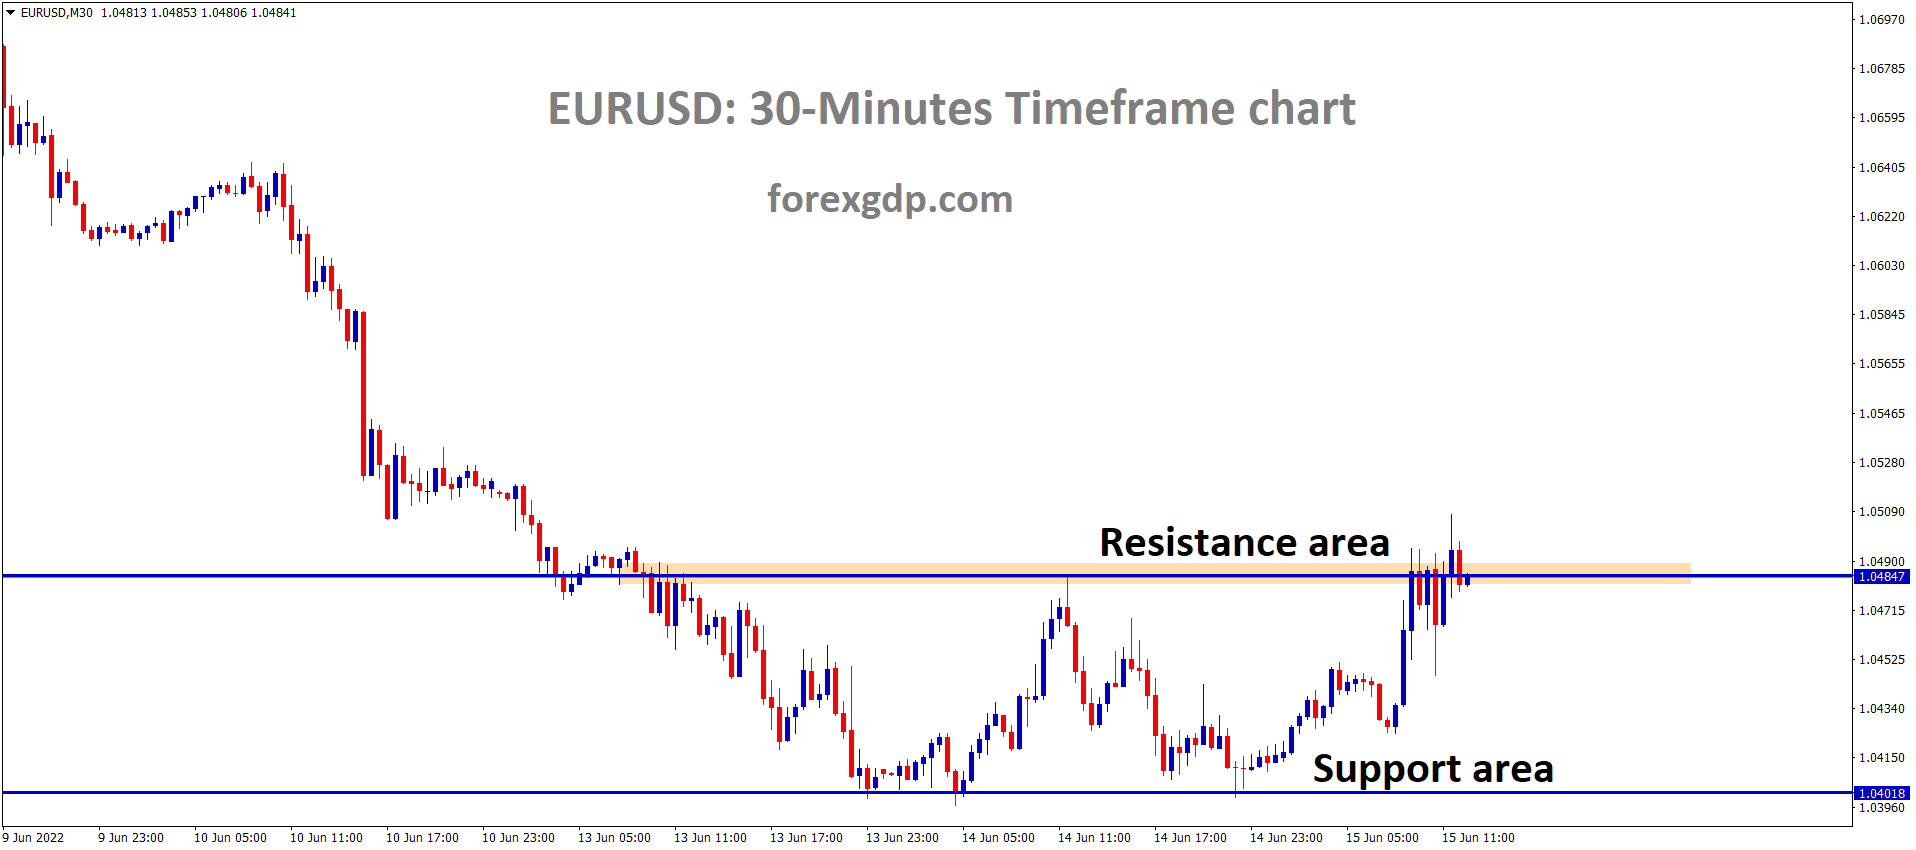 EURUSD is moving in the Box Pattern and the Market has reached the Horizontal resistance area of the Pattern